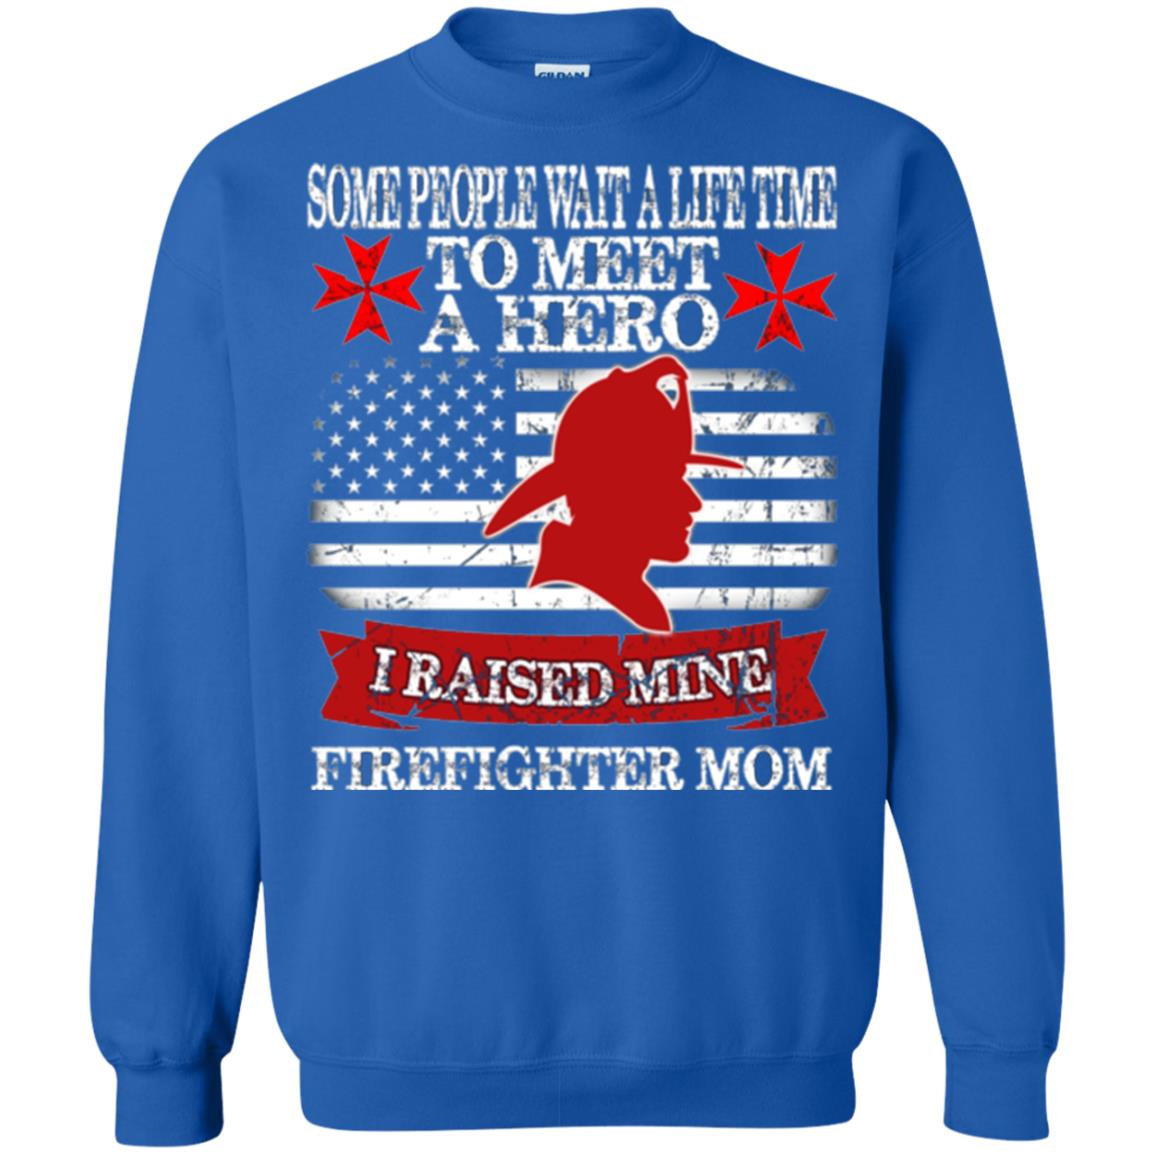 Inktee Store - Firefighter For Proud Mom Father Sweatshirt Image